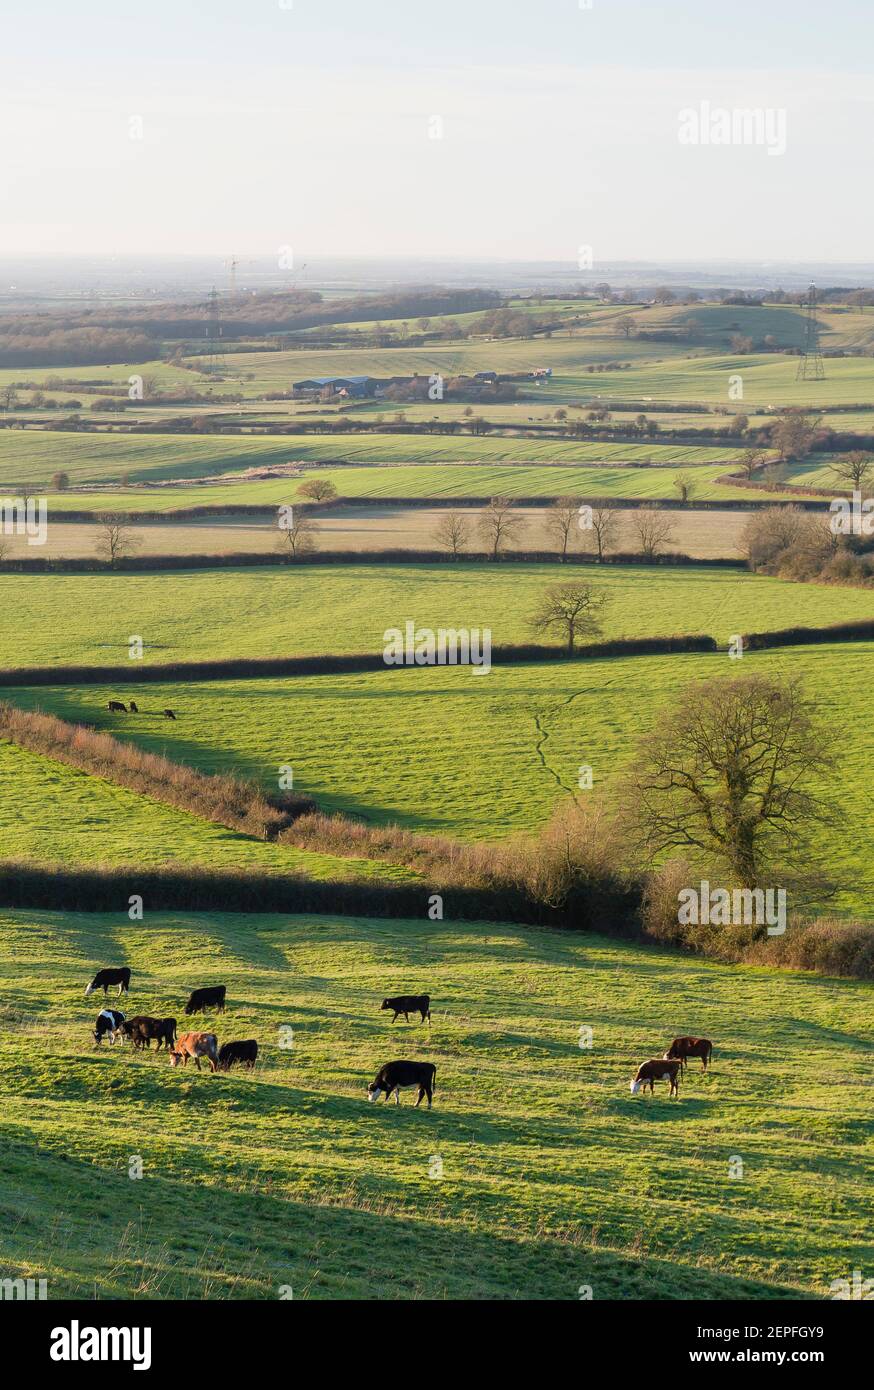 Cattle farming in a UK countryside scene, farmland with fields and hedgerows in Aylesbury Vale, Buckinghamshire, UK Stock Photo